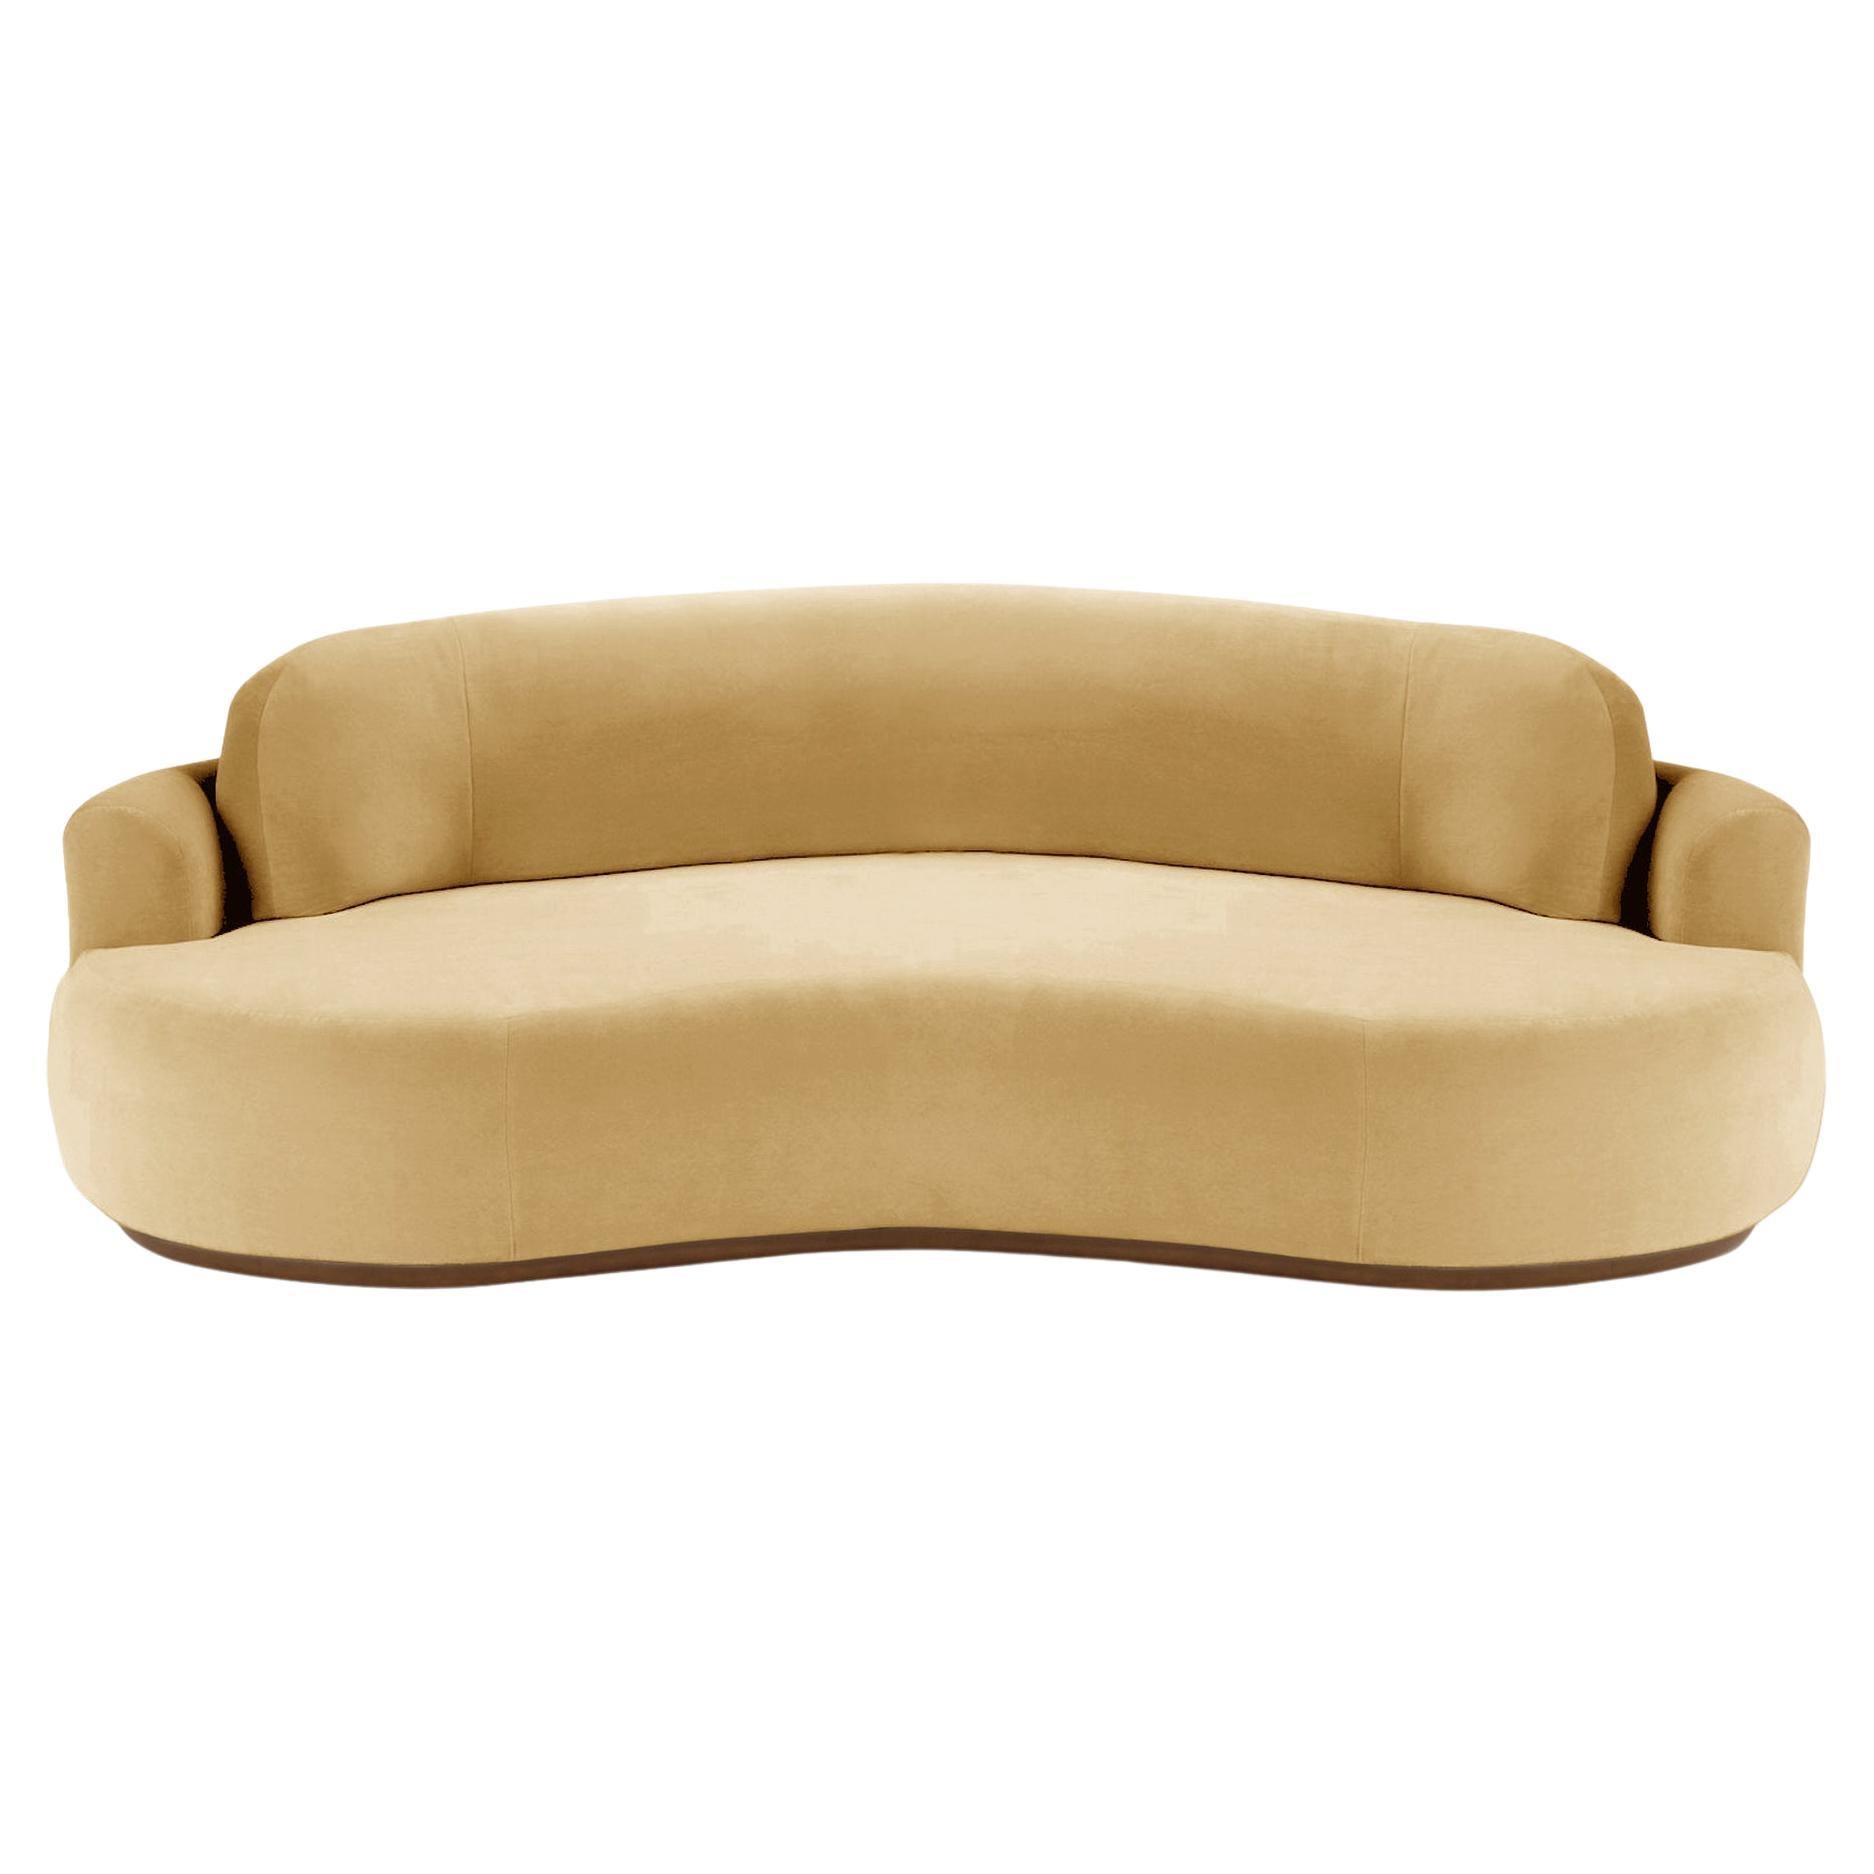 Naked Round Sofa, Small with Beech Ash-056-1 and Vigo Plantain For Sale